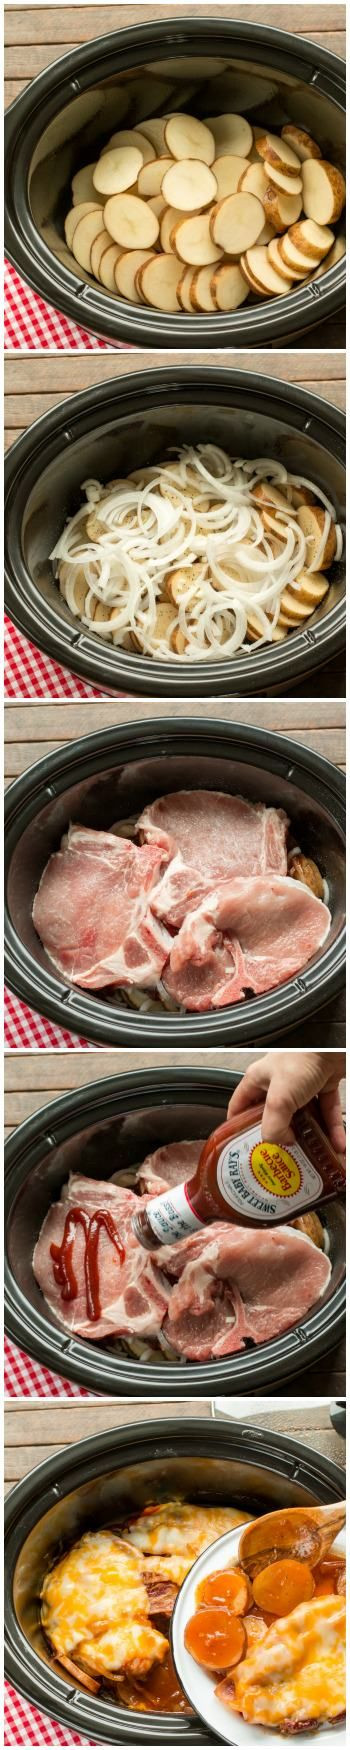 Sweet Baby Ray'S Bbq Pork Chops In Oven
 Slow Cooker Sweet Baby Ray s Barbecue Pork Chops and